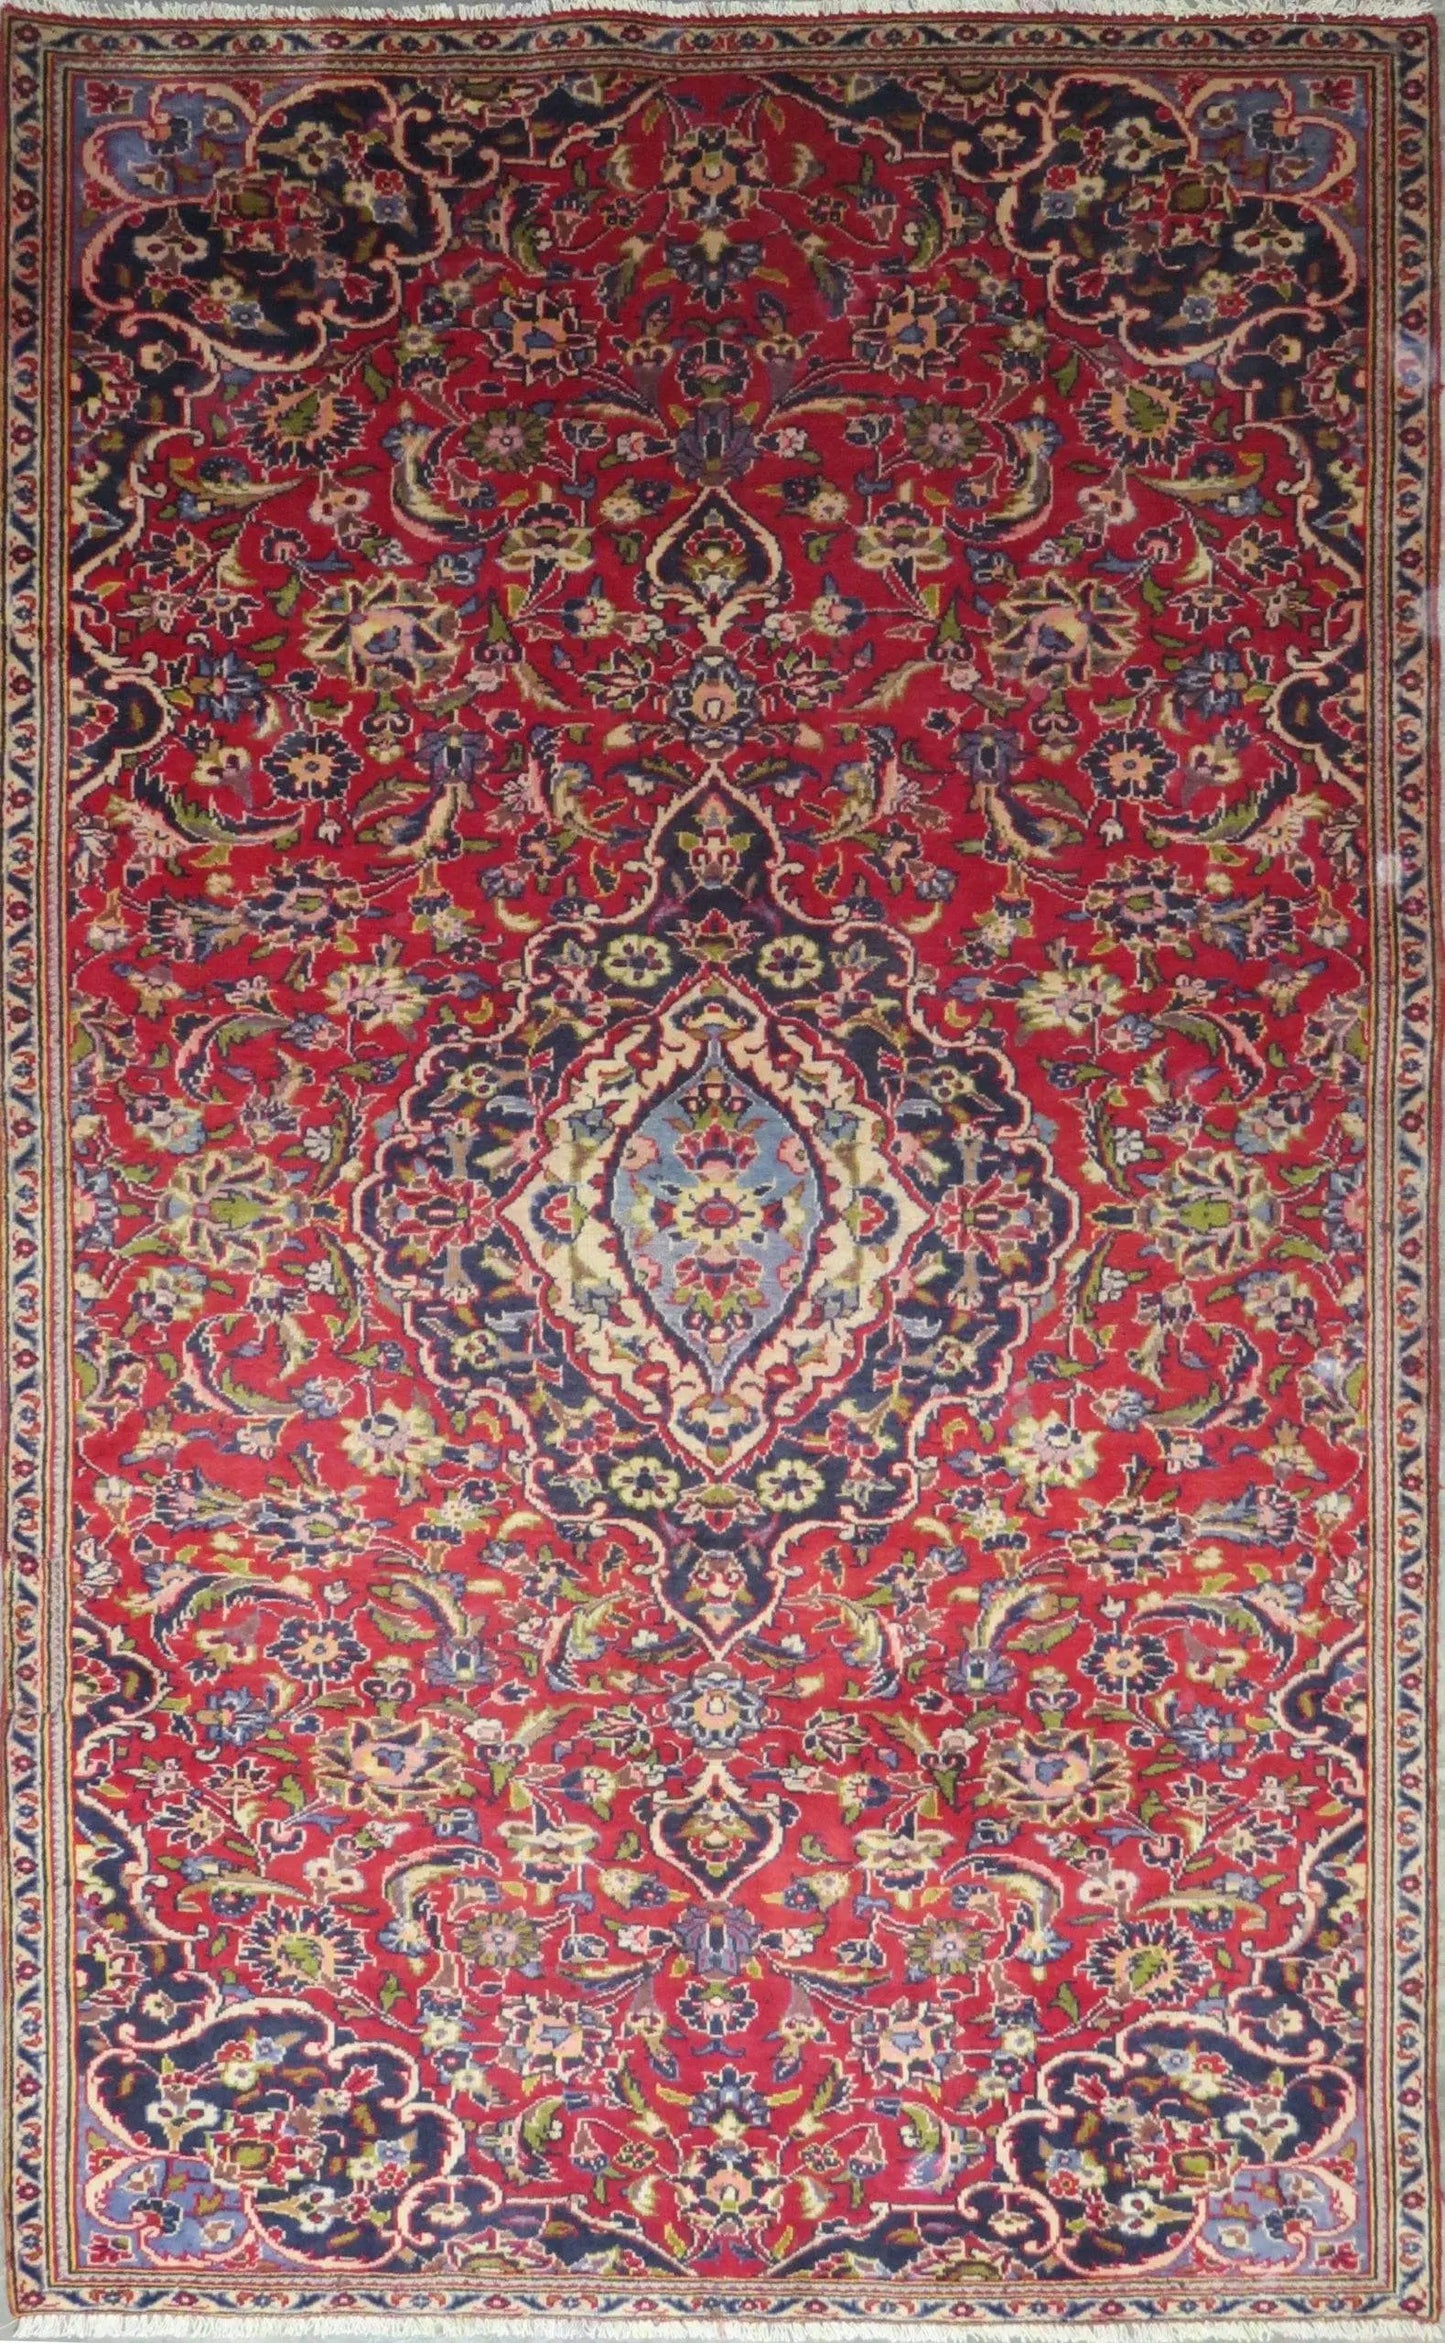 Hand-Knotted Persian Wool Rug _ Luxurious Vintage Design, 7'9" x 4'9", Artisan Crafted